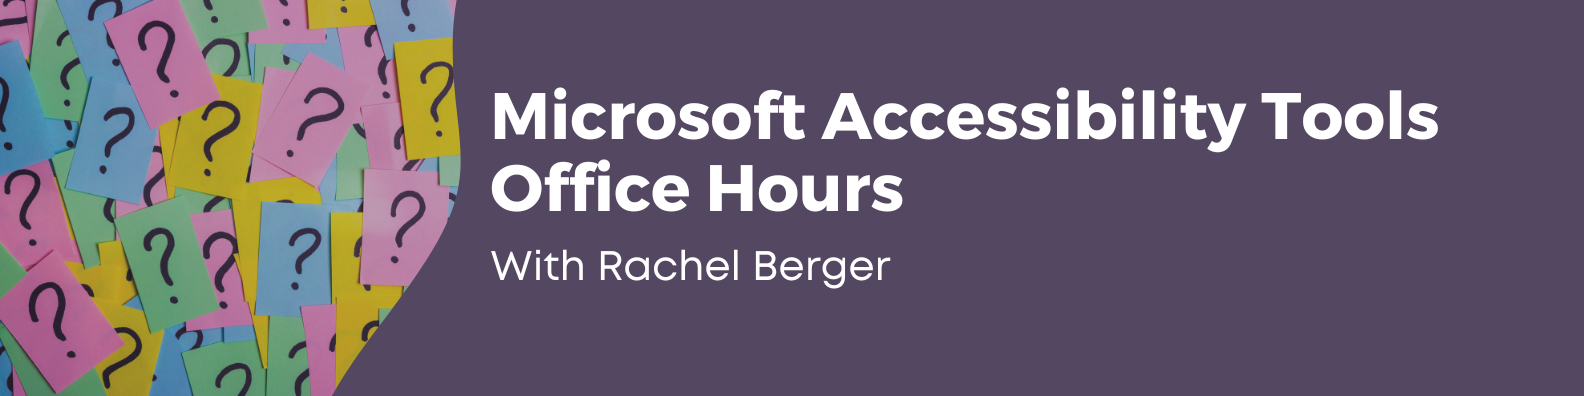 Microsoft Accessibility Tools Office Hours with Rachel Berger